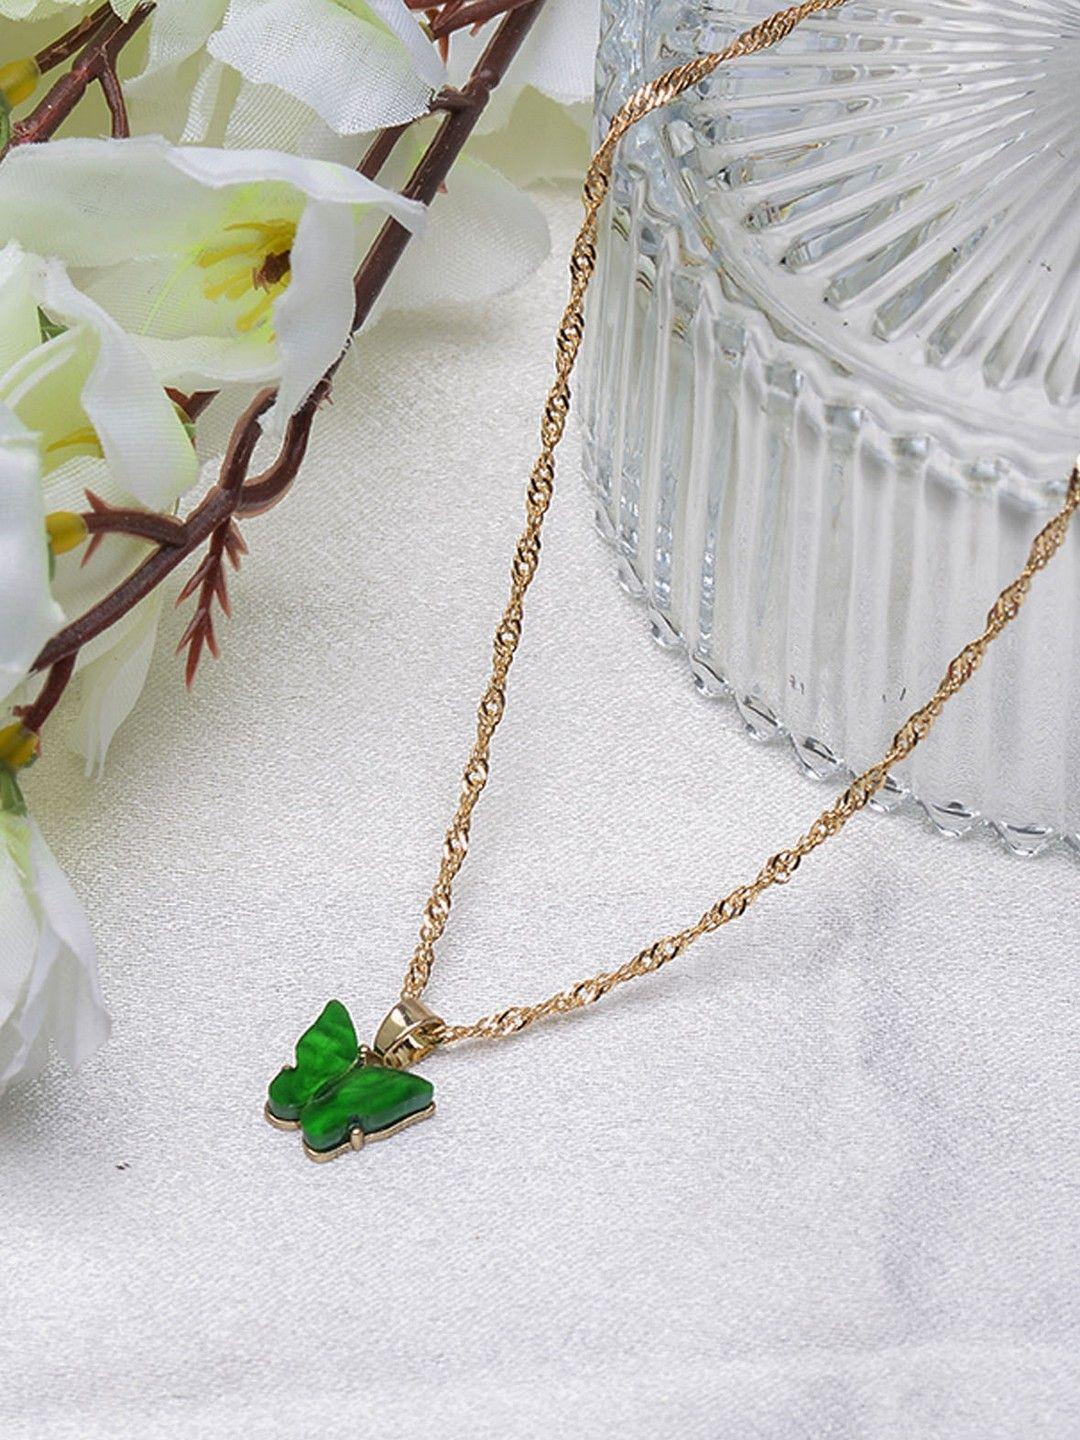 poplins green & gold-toned butterfly chain